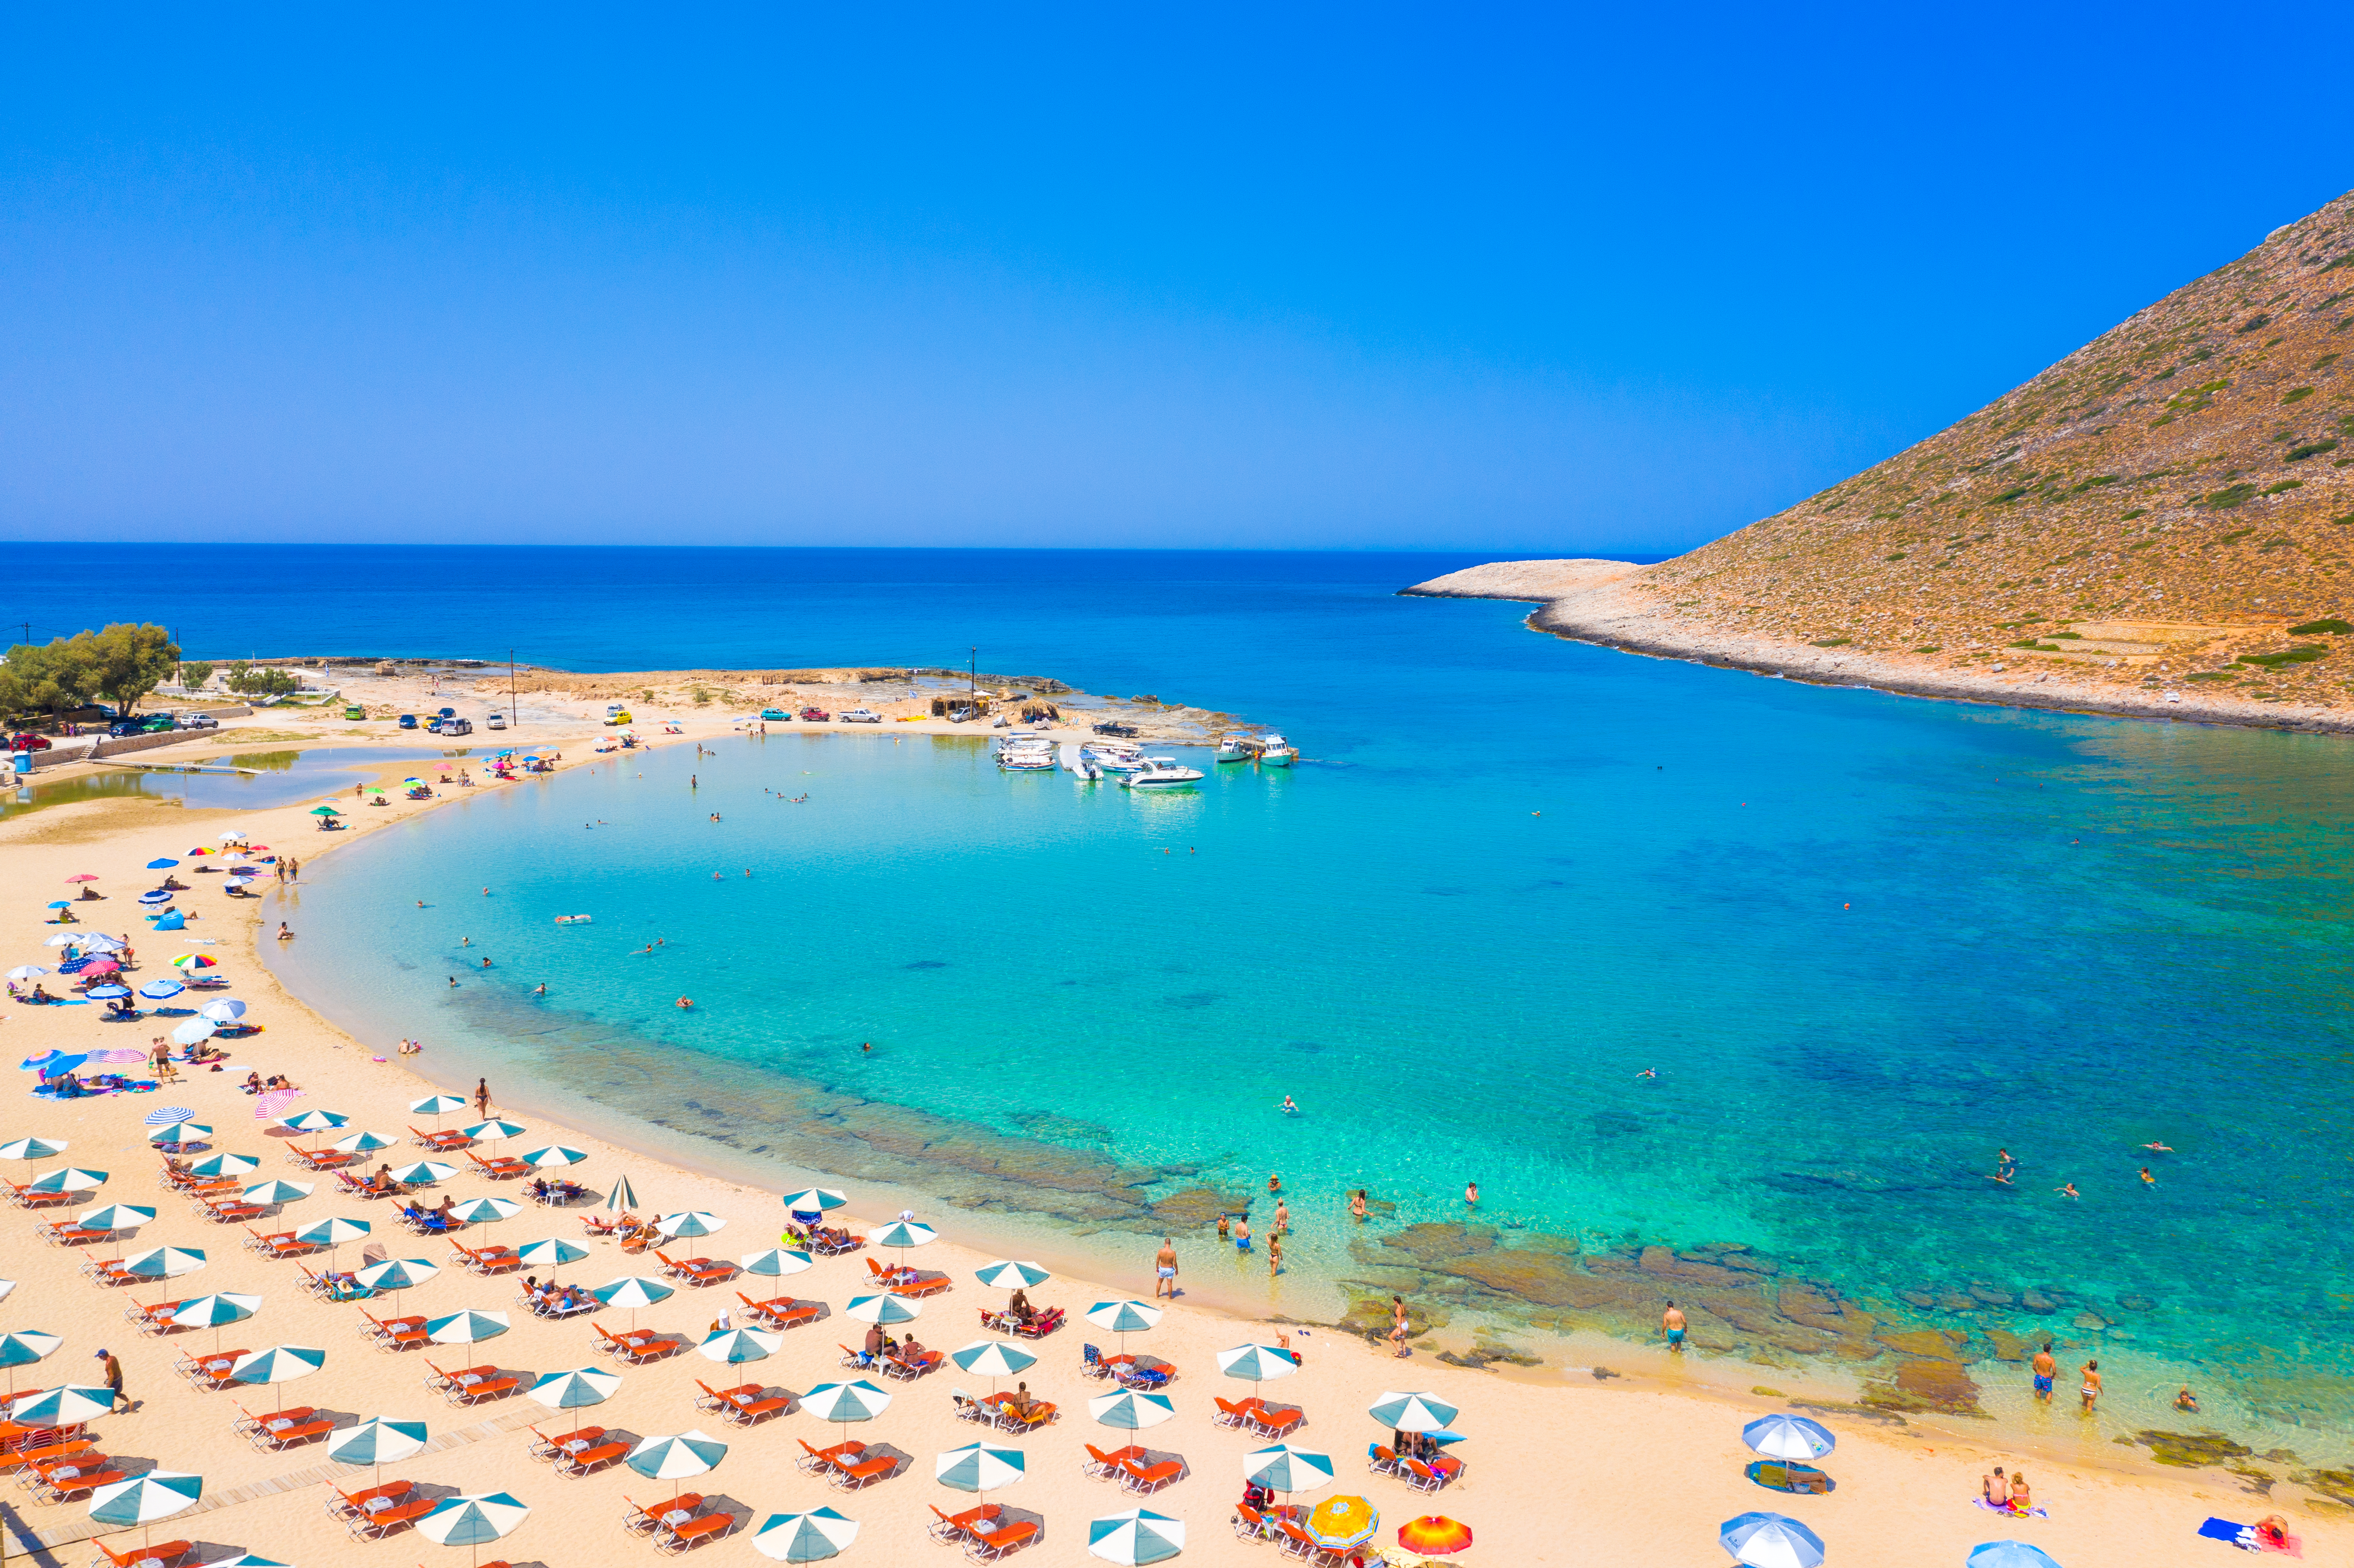 The deals start from £271pp and include your return flights and all-inclusive accommodation